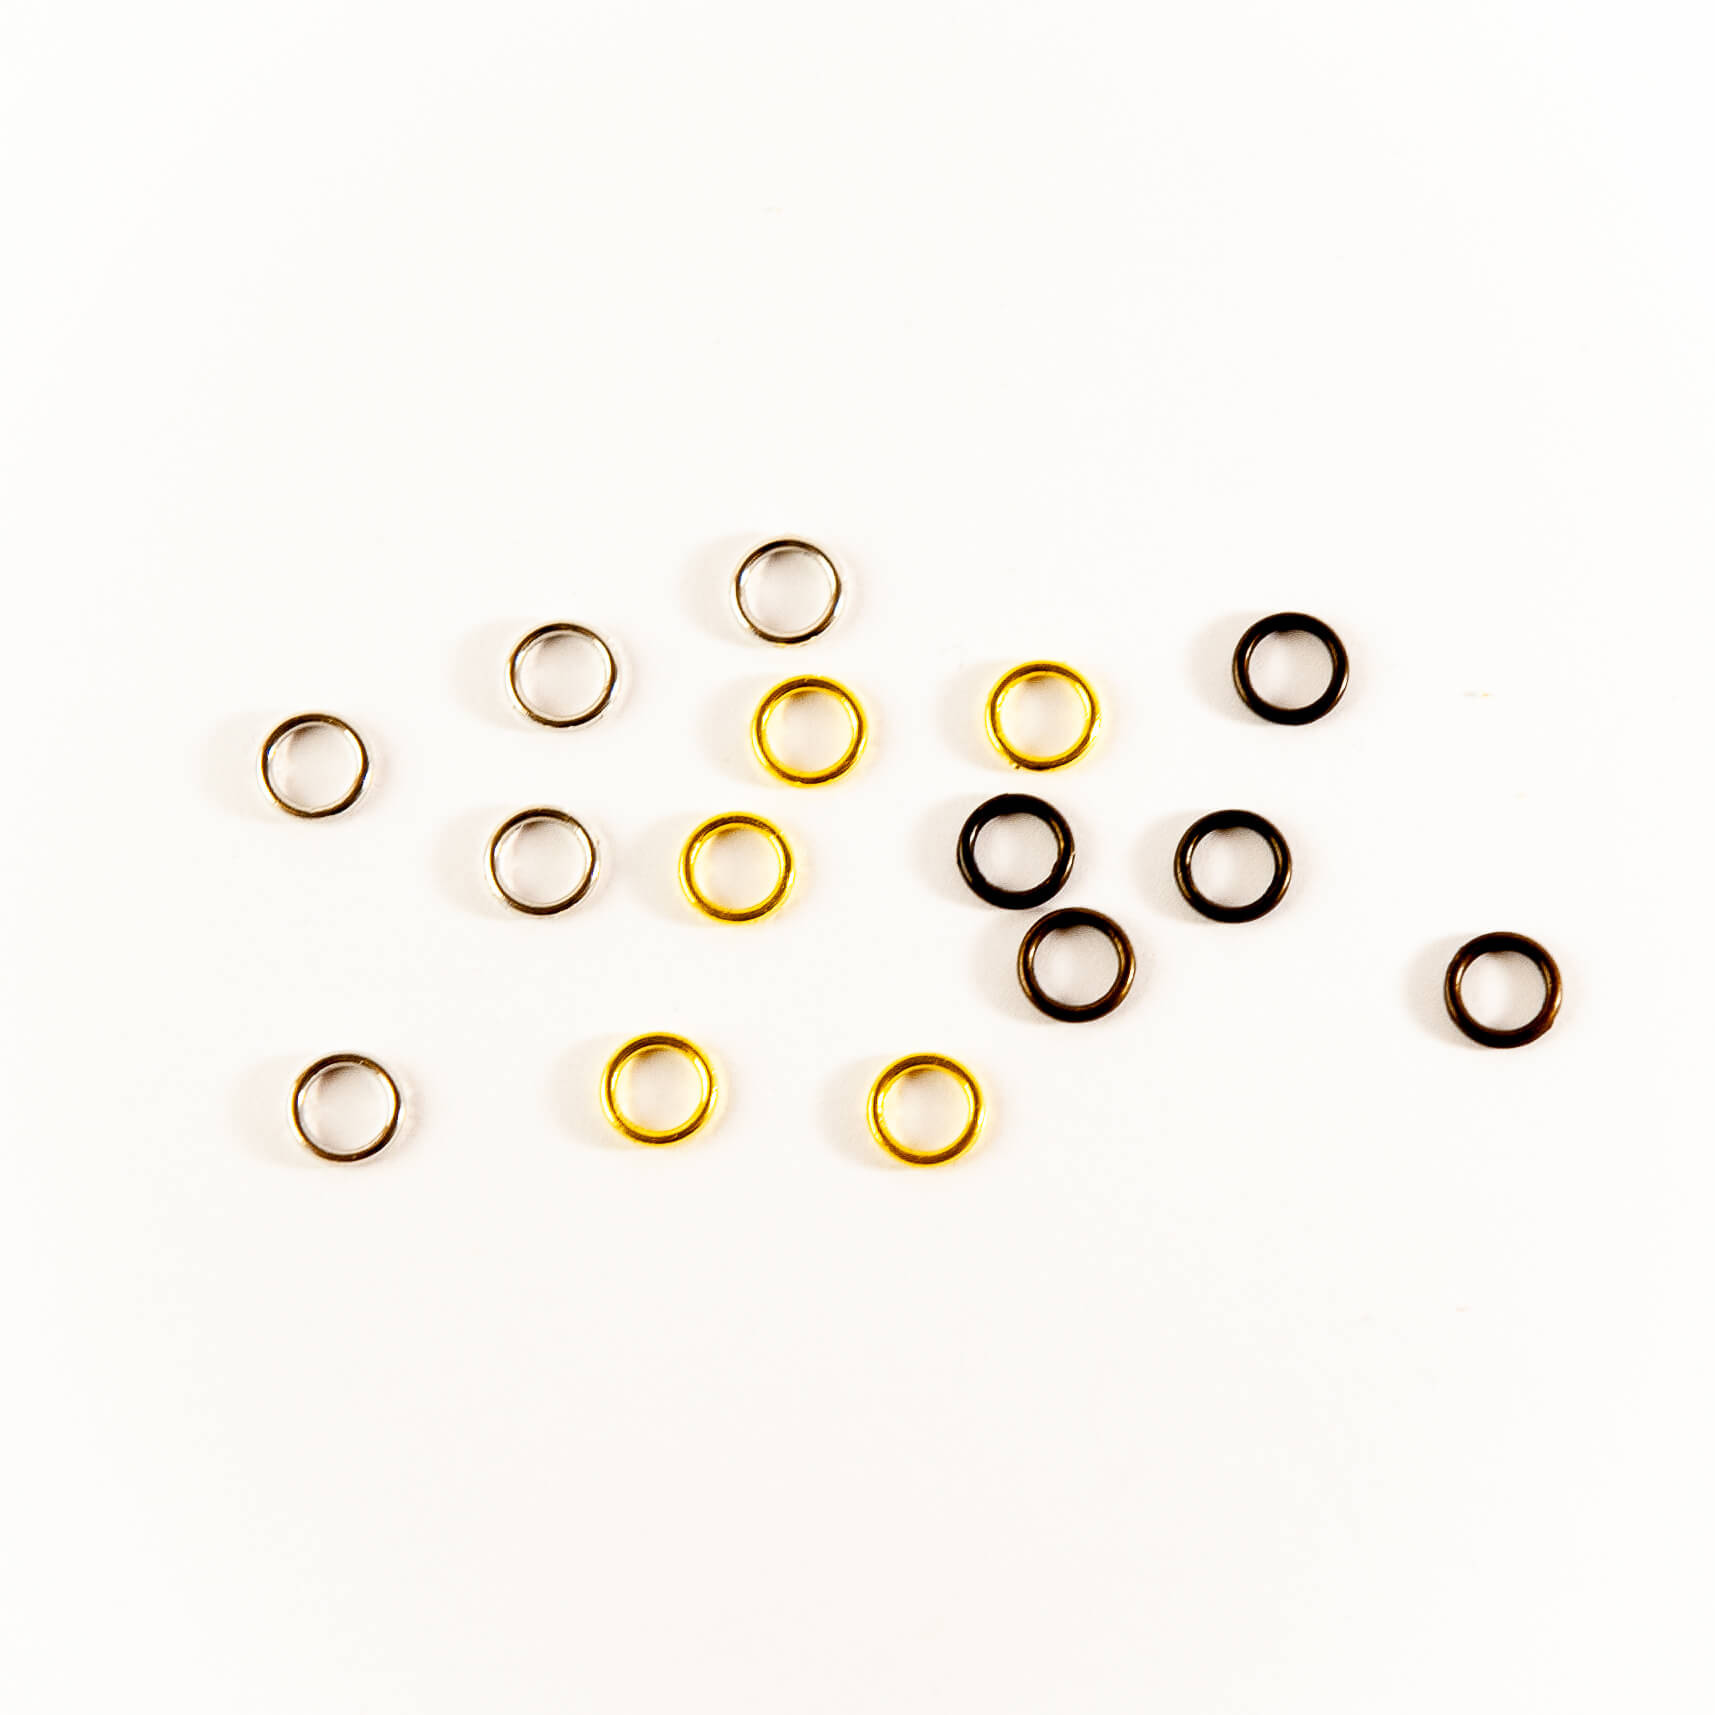 Metal Ring Stitch Markers - 5mm / US8 - 18pcs - SkillfullyTangled